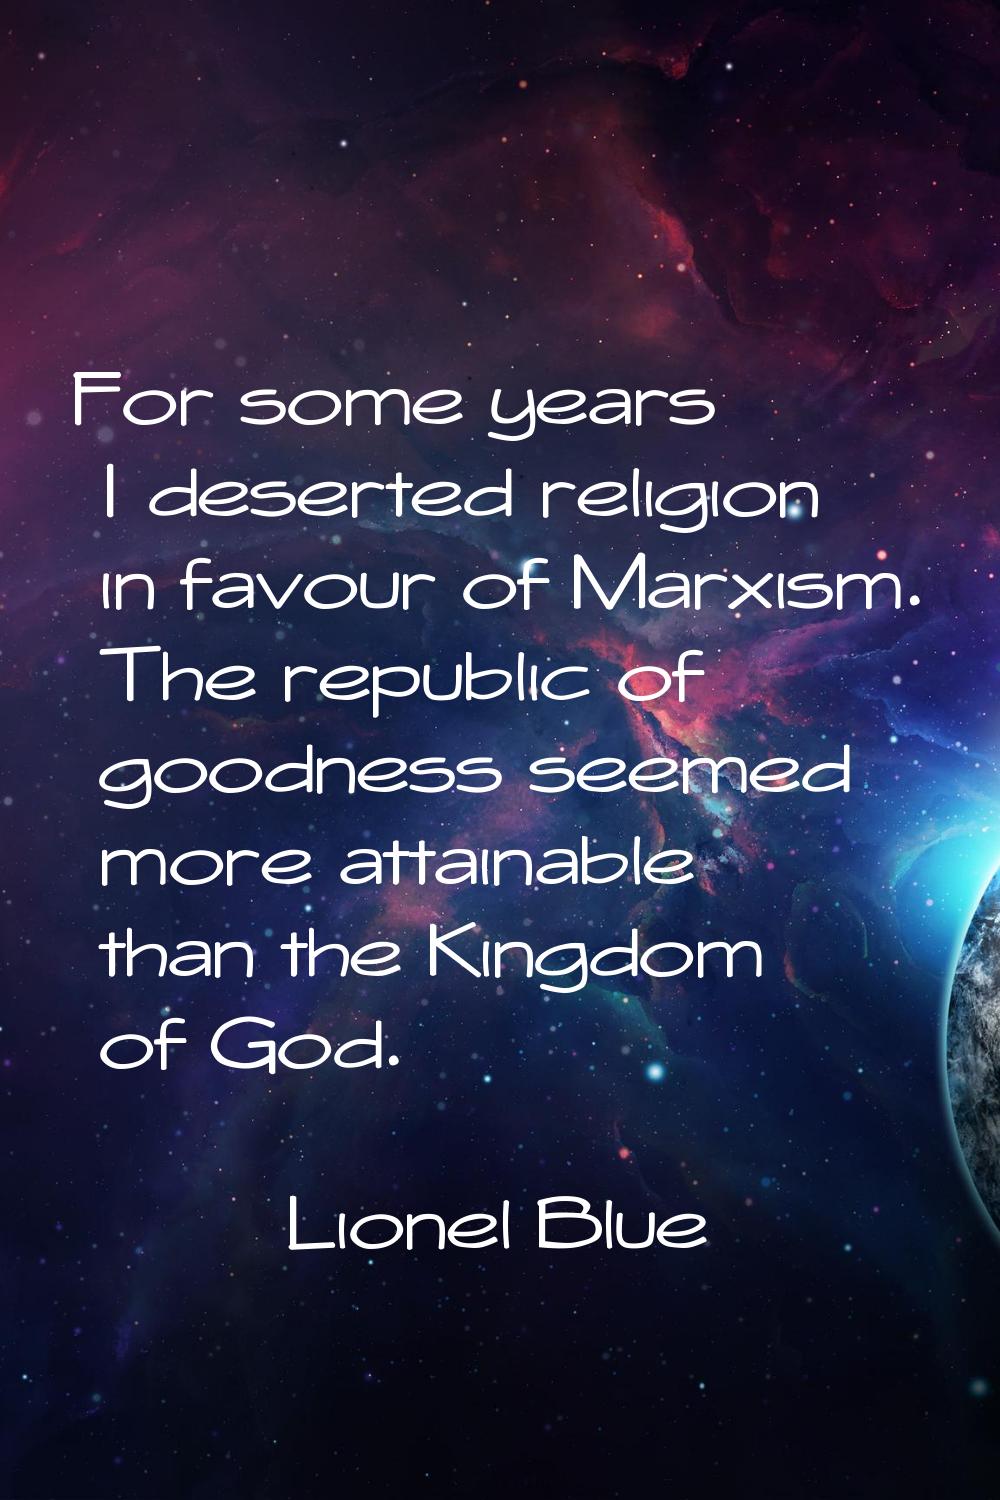 For some years I deserted religion in favour of Marxism. The republic of goodness seemed more attai